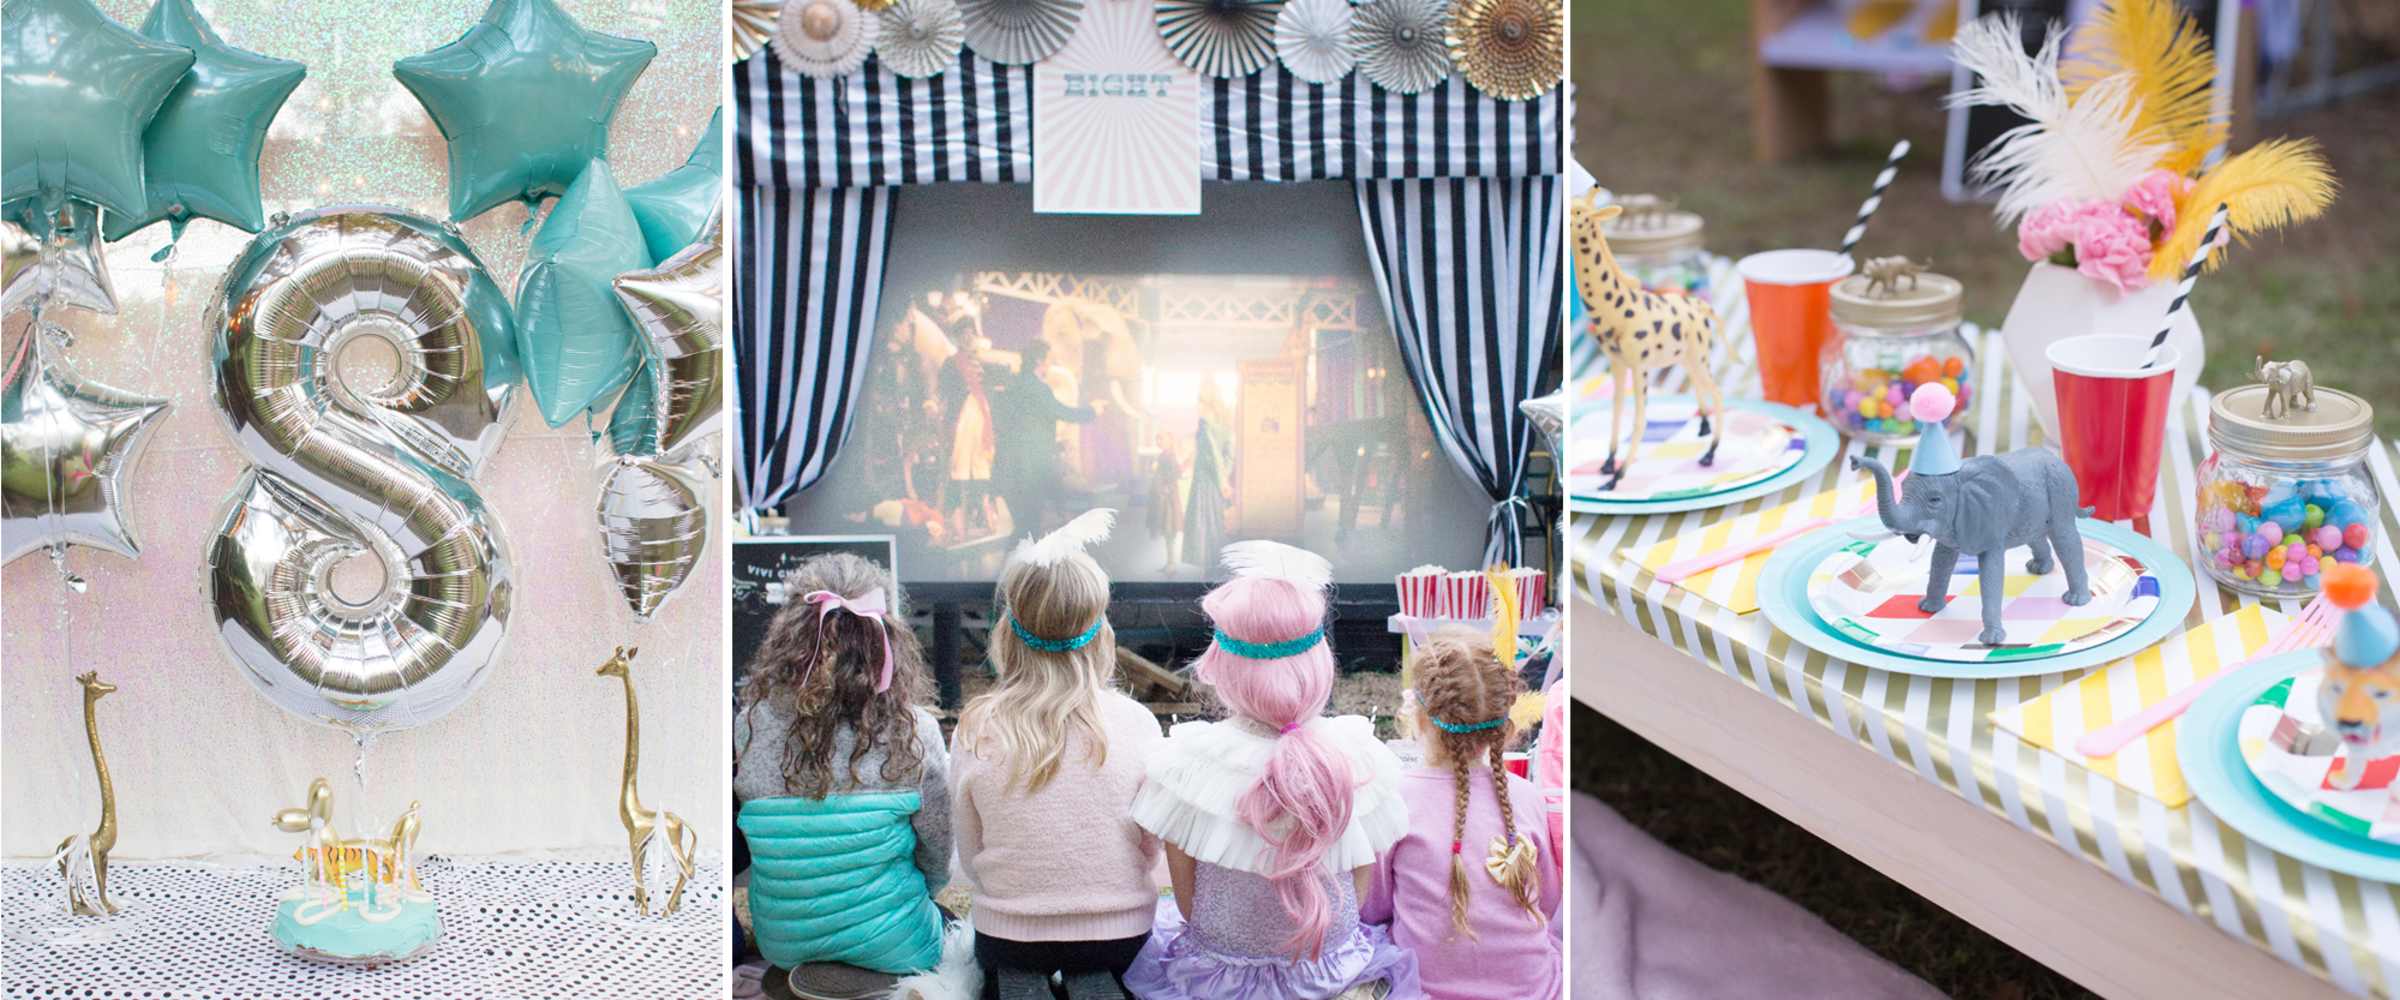 A Greatest Showman Inspired Birthday Party